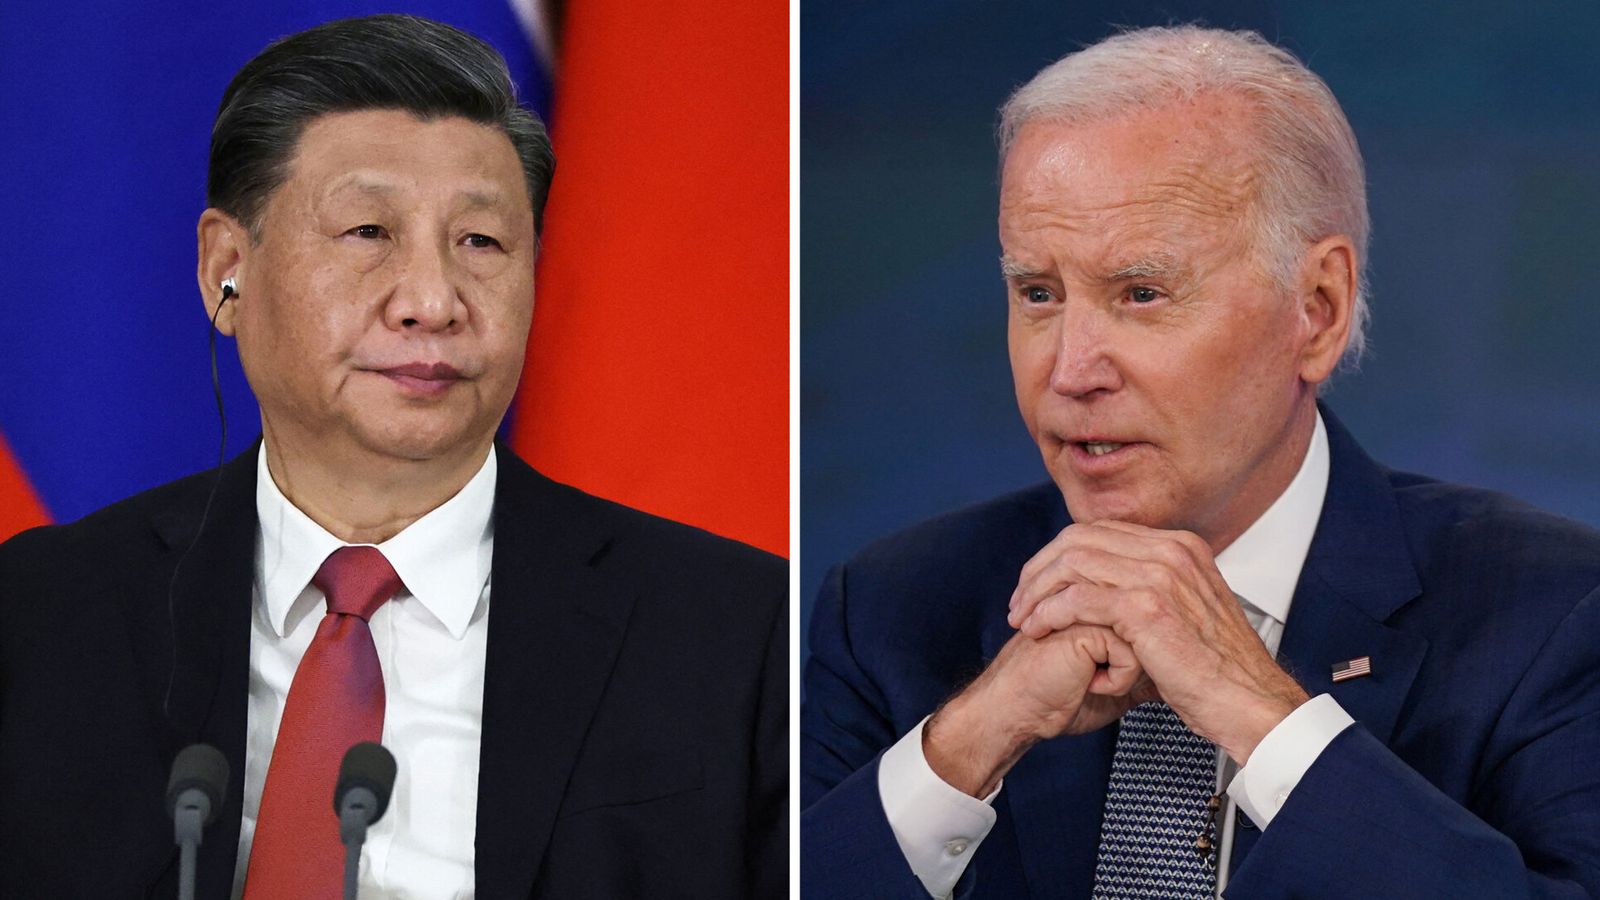 Joe Biden's description of Xi Jinping as a dictator criticised as 'absurd and irresponsible' by China 